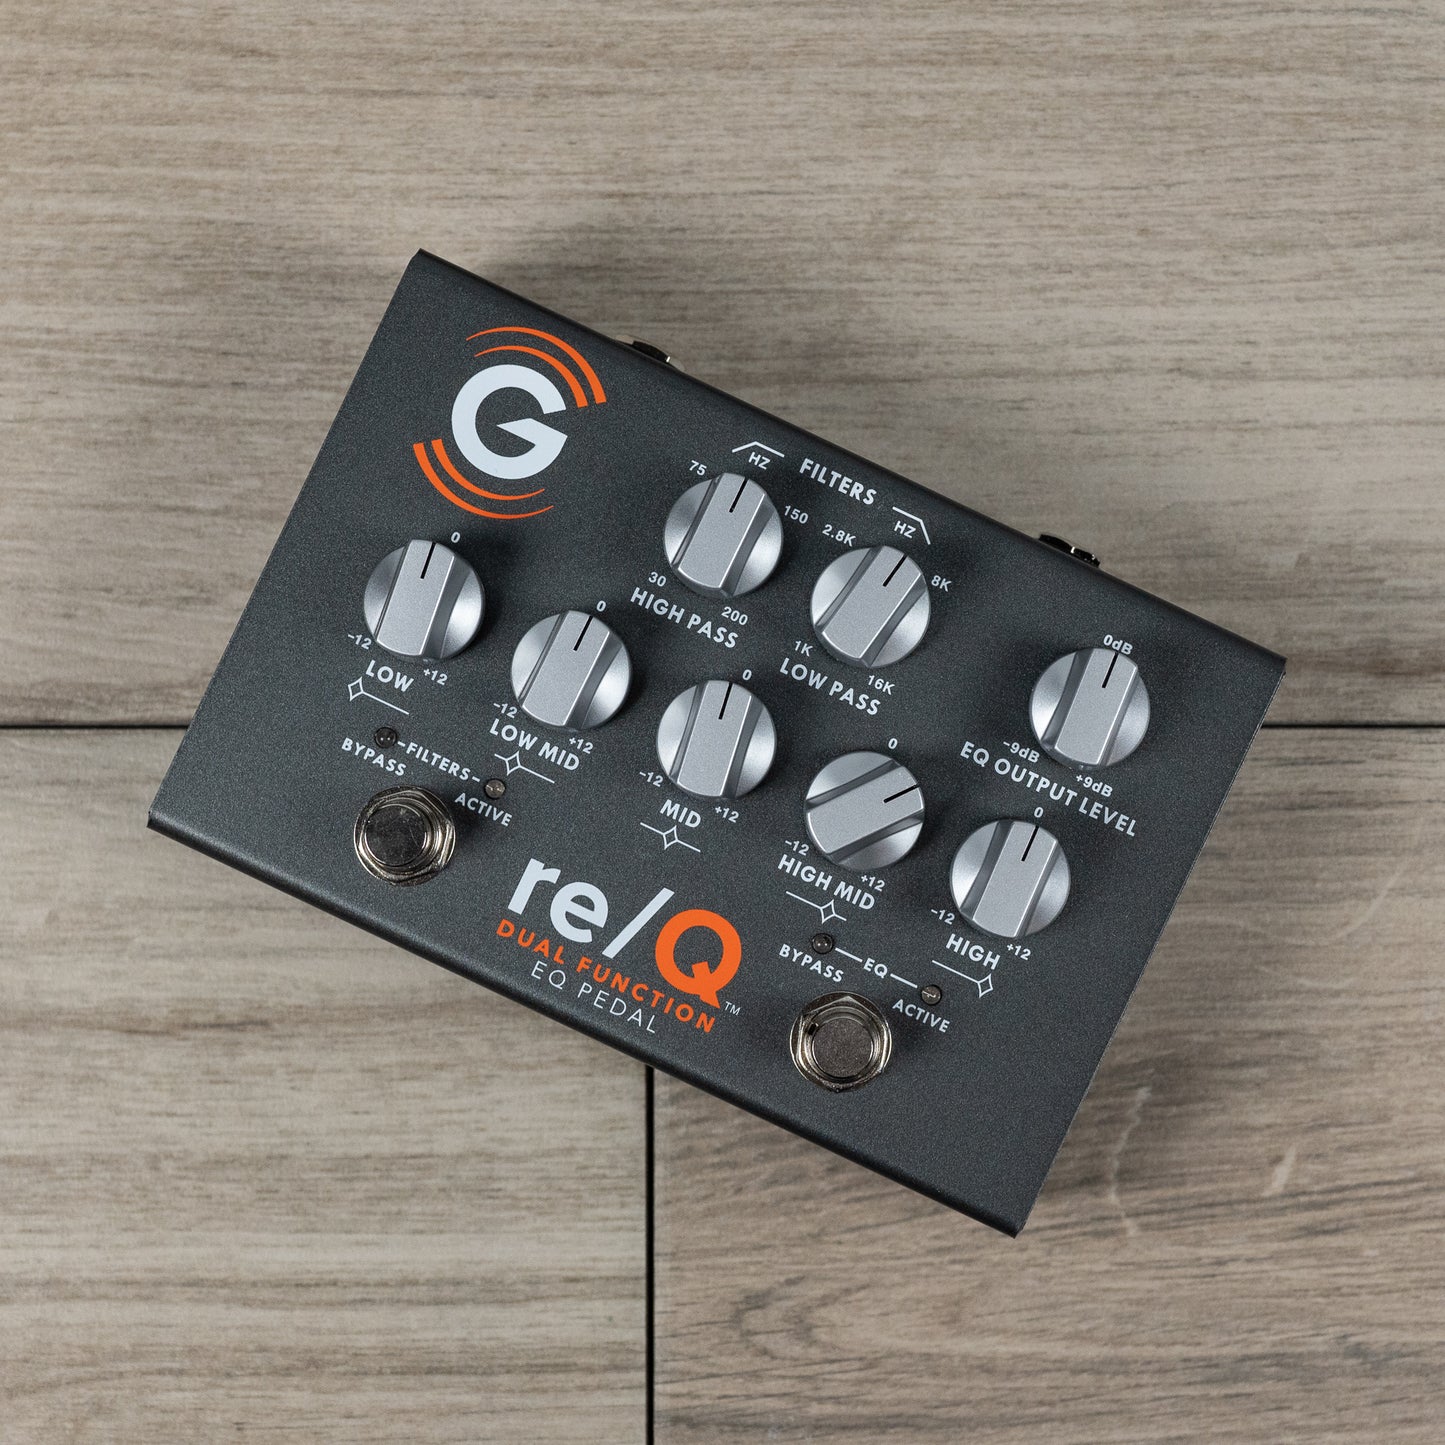 Genzler Amplification re/Q Dual Function EQ Bass Pedal